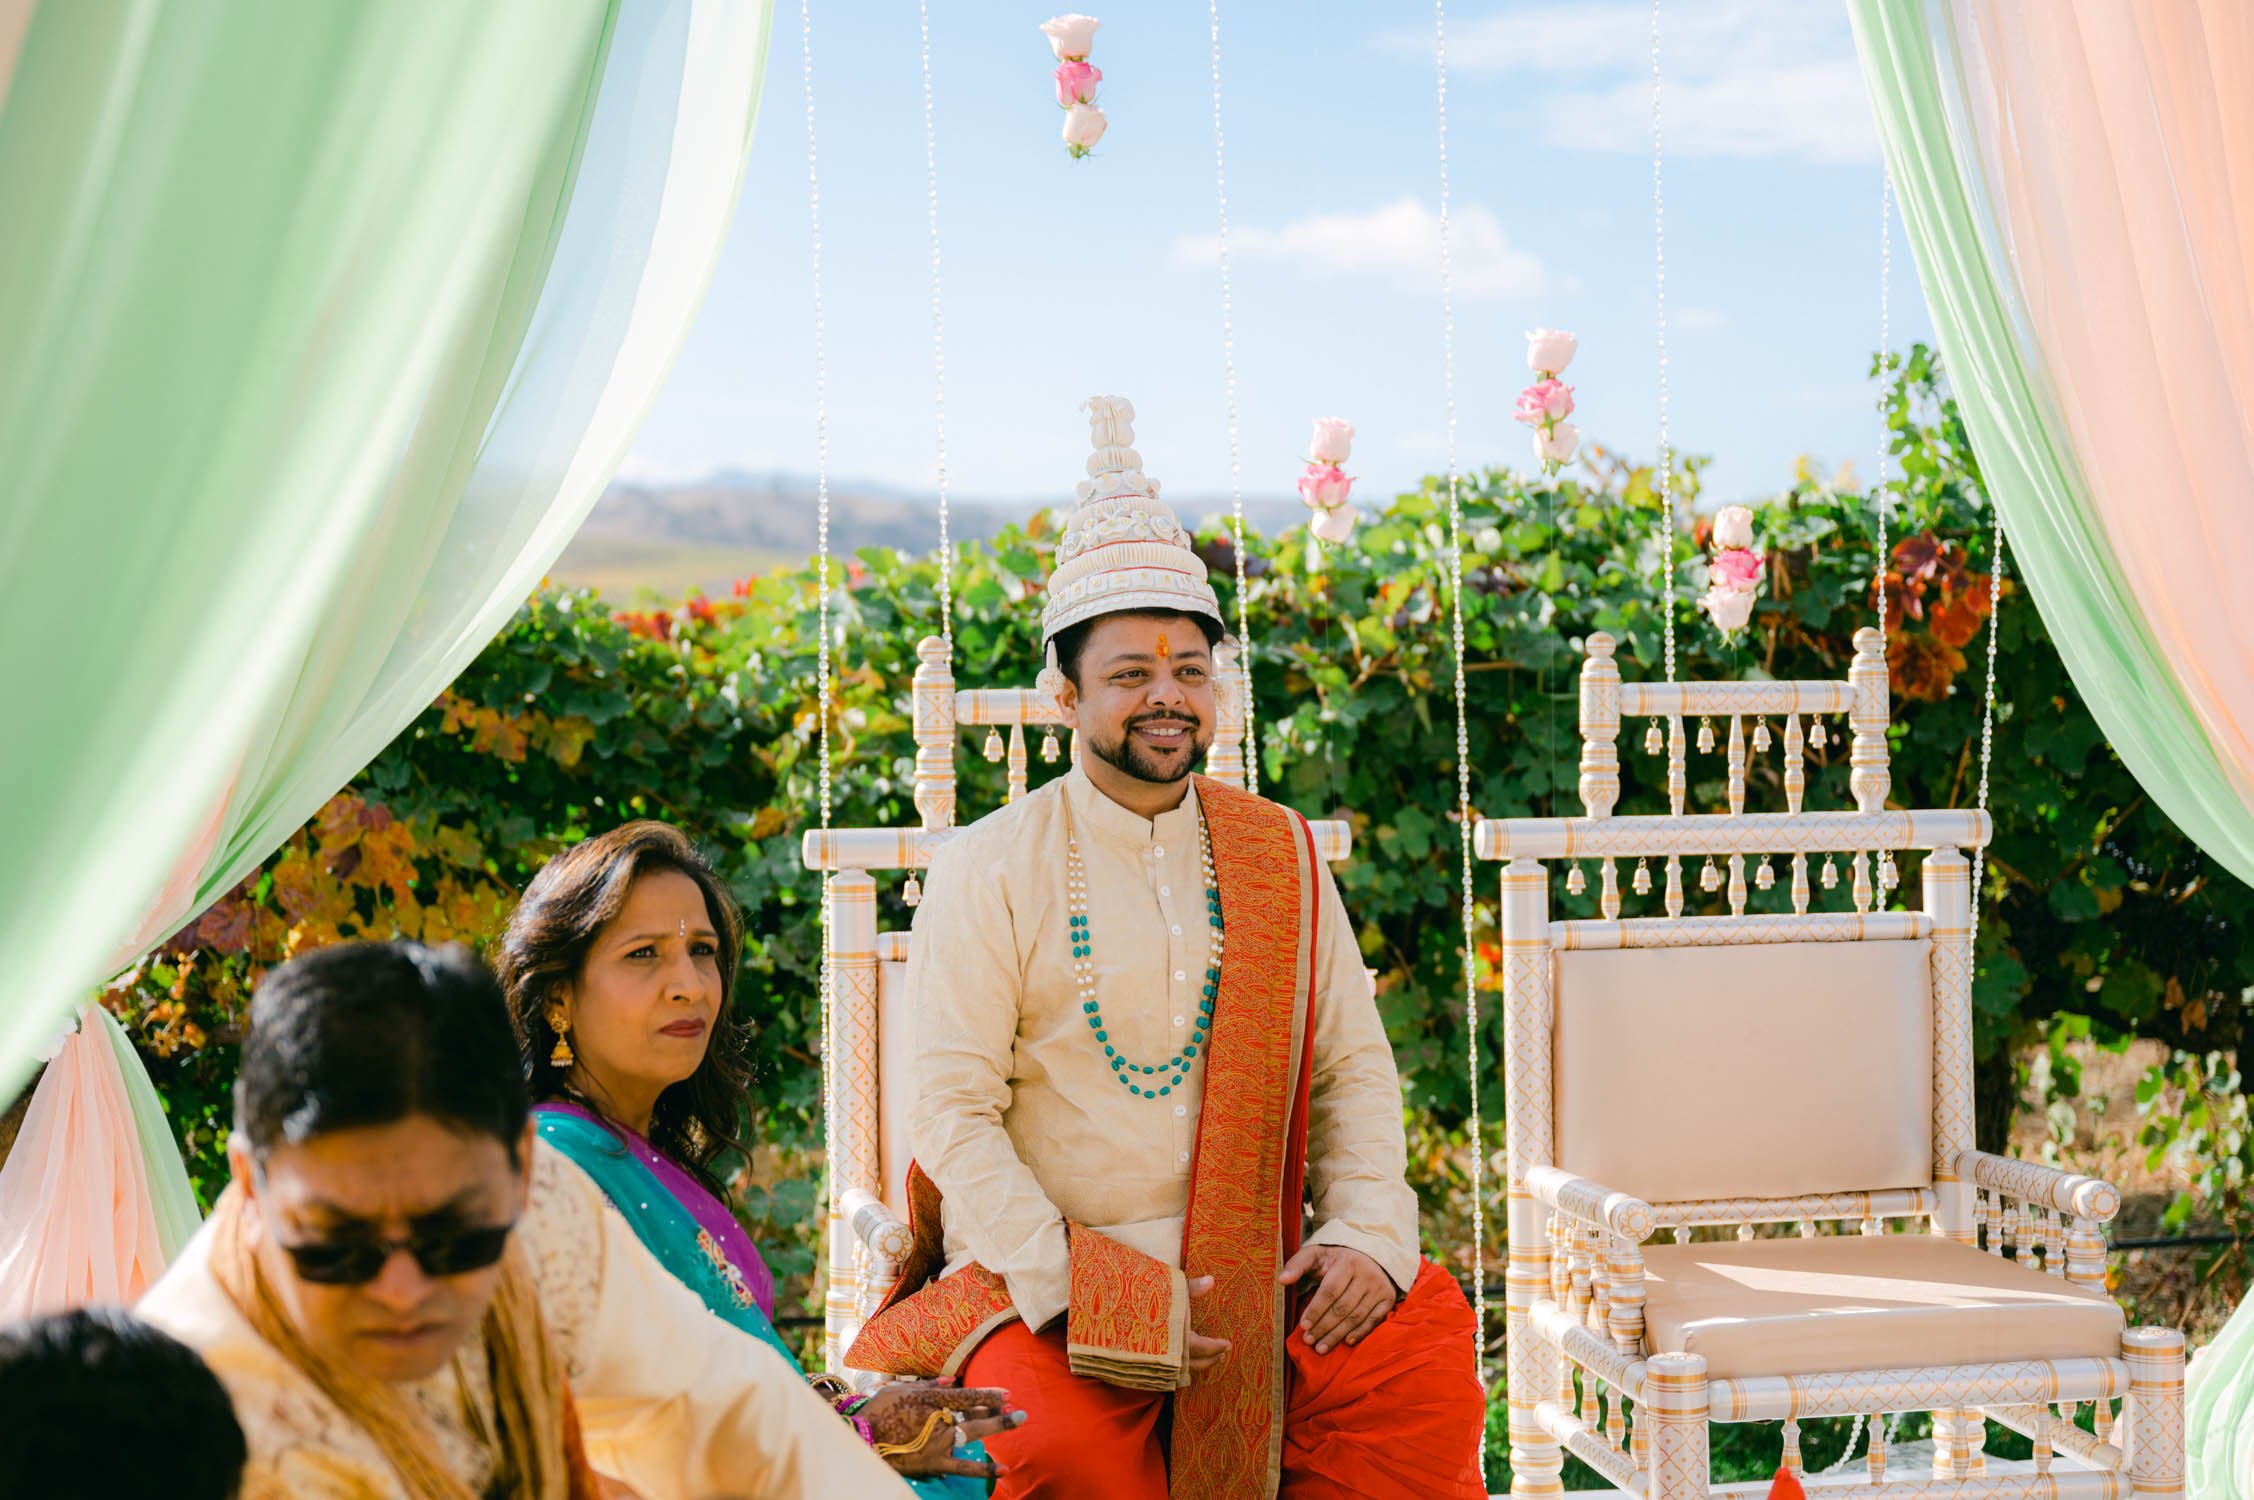 Hindu ceremony with a pre wedding ritual, photo of groom seeing his bride